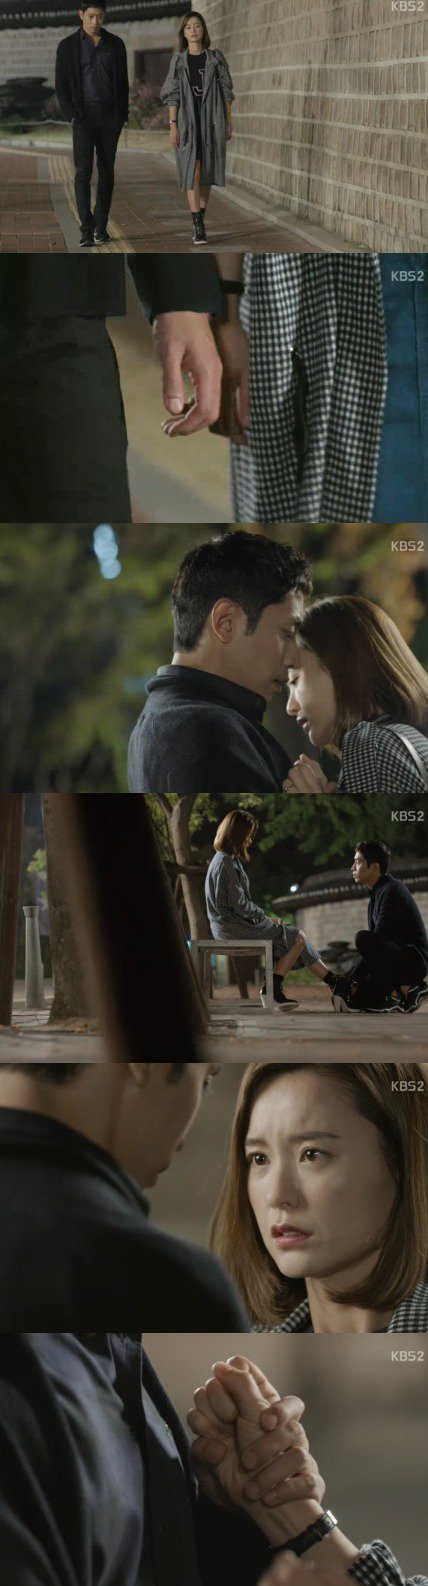 episode 13 captures for the Korean drama 'Discovery of Romance'